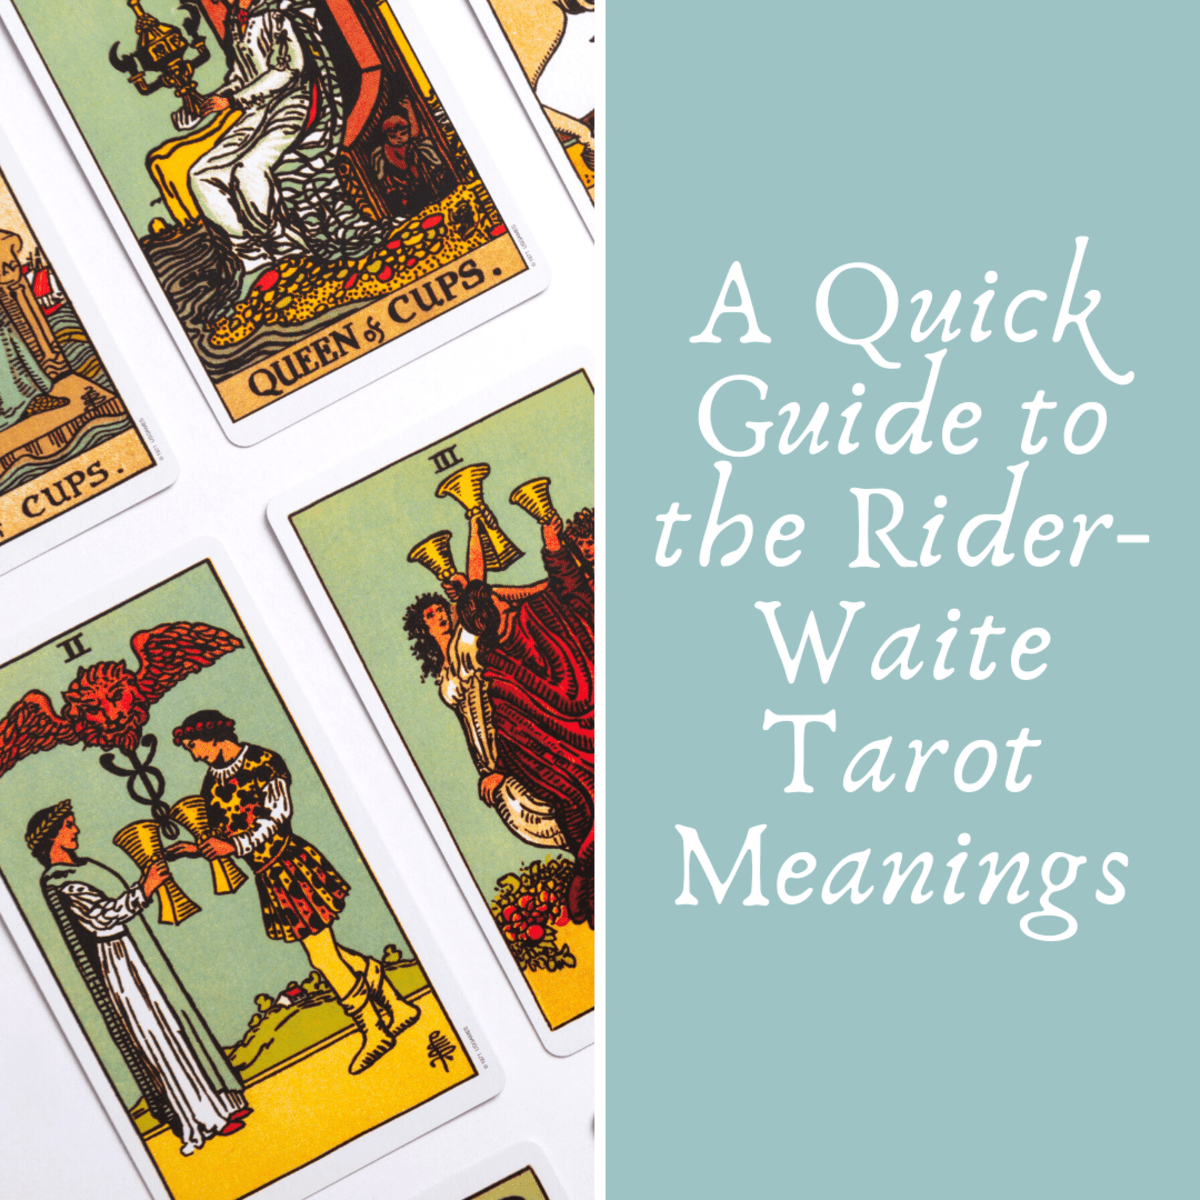 Reference to the Rider-Waite Tarot Meanings -